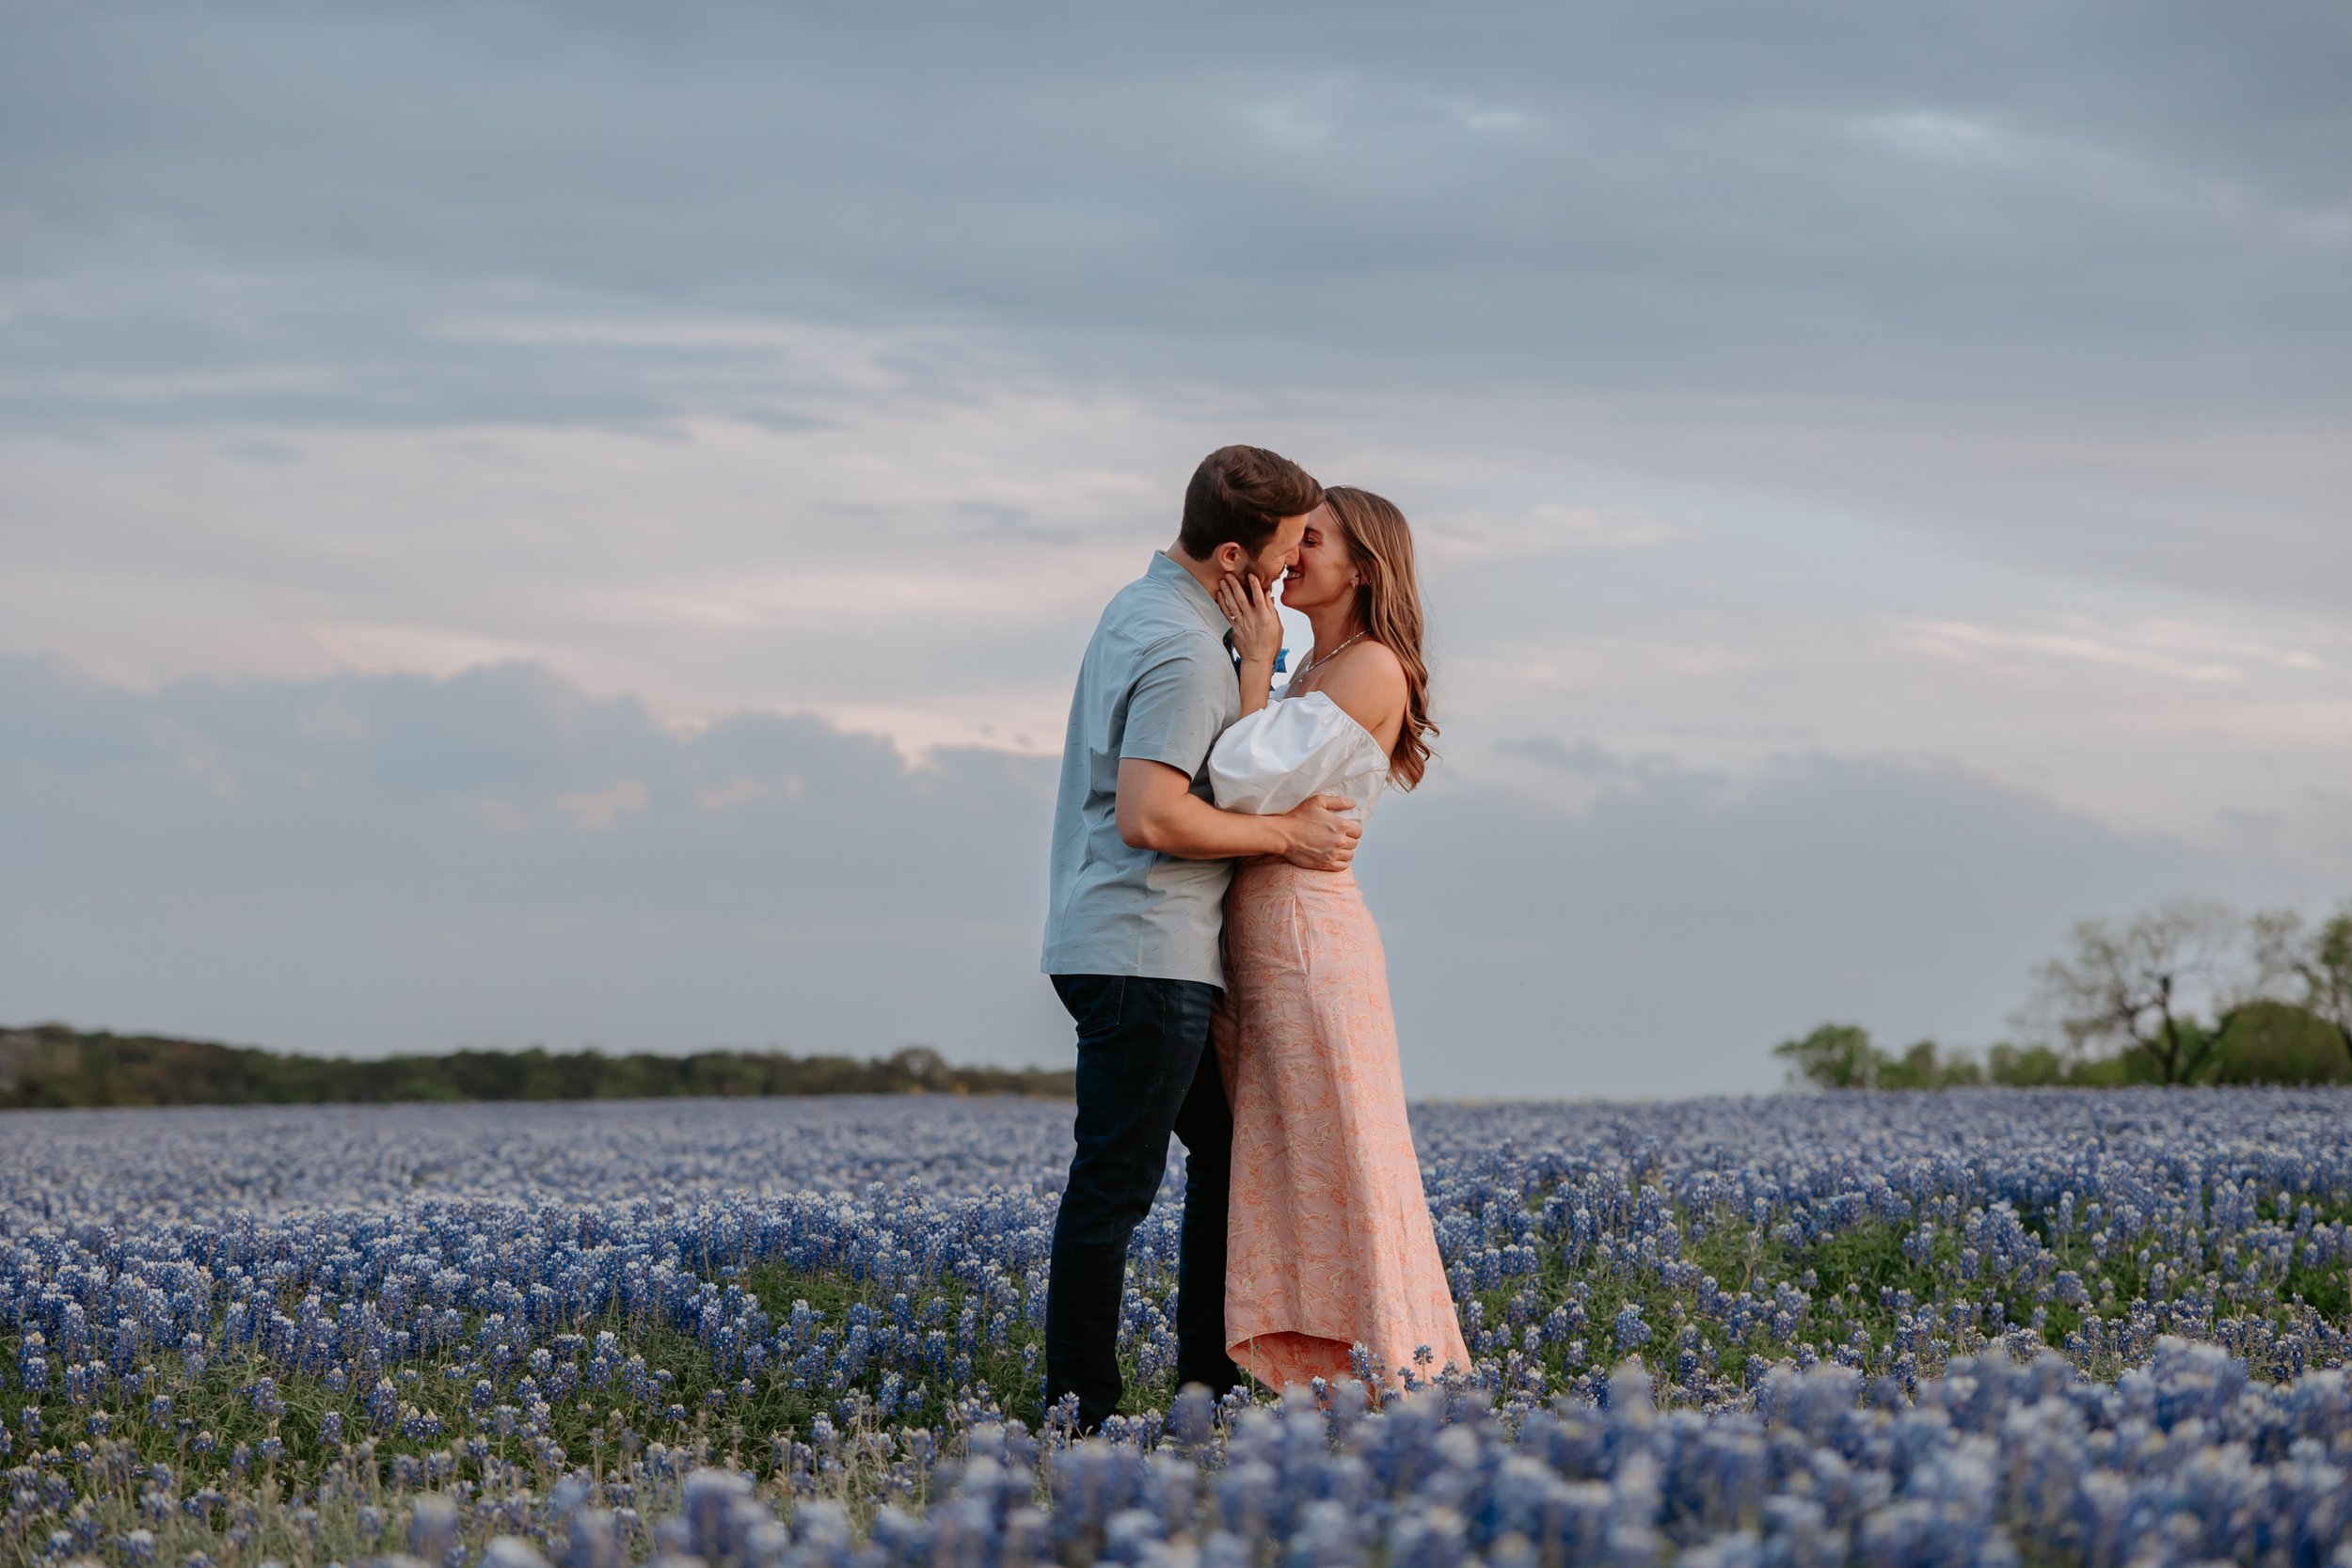 Man and woman kiss in a field of blue flowers.